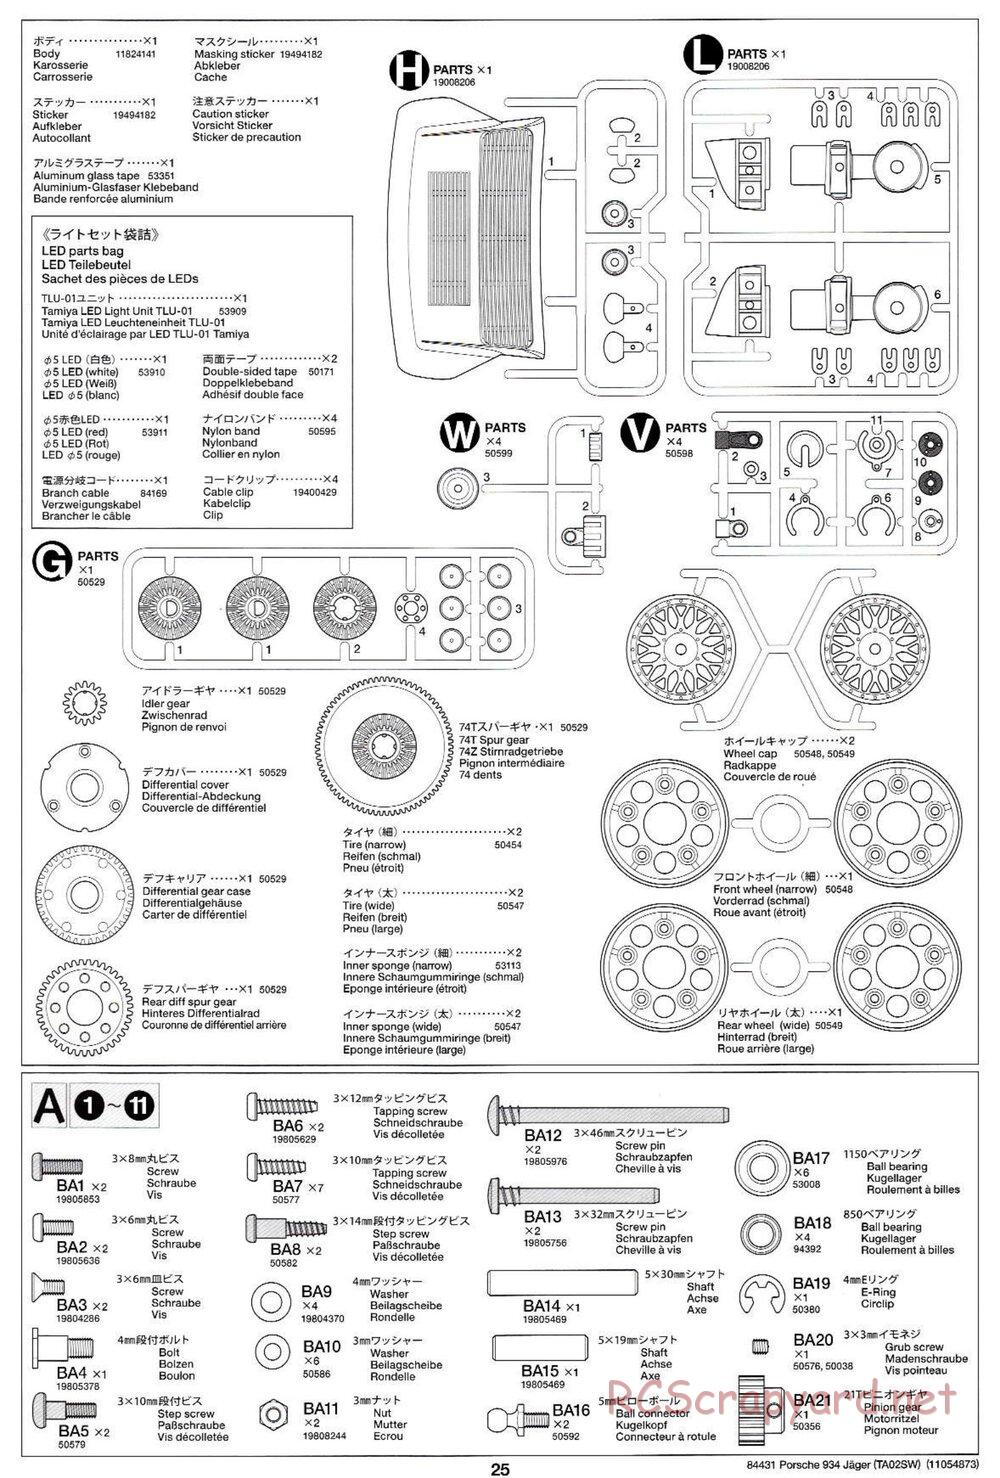 Tamiya - Porsche Turbo RSR Type 934 Jagermeister - TA-02SW Chassis - Manual - Page 25